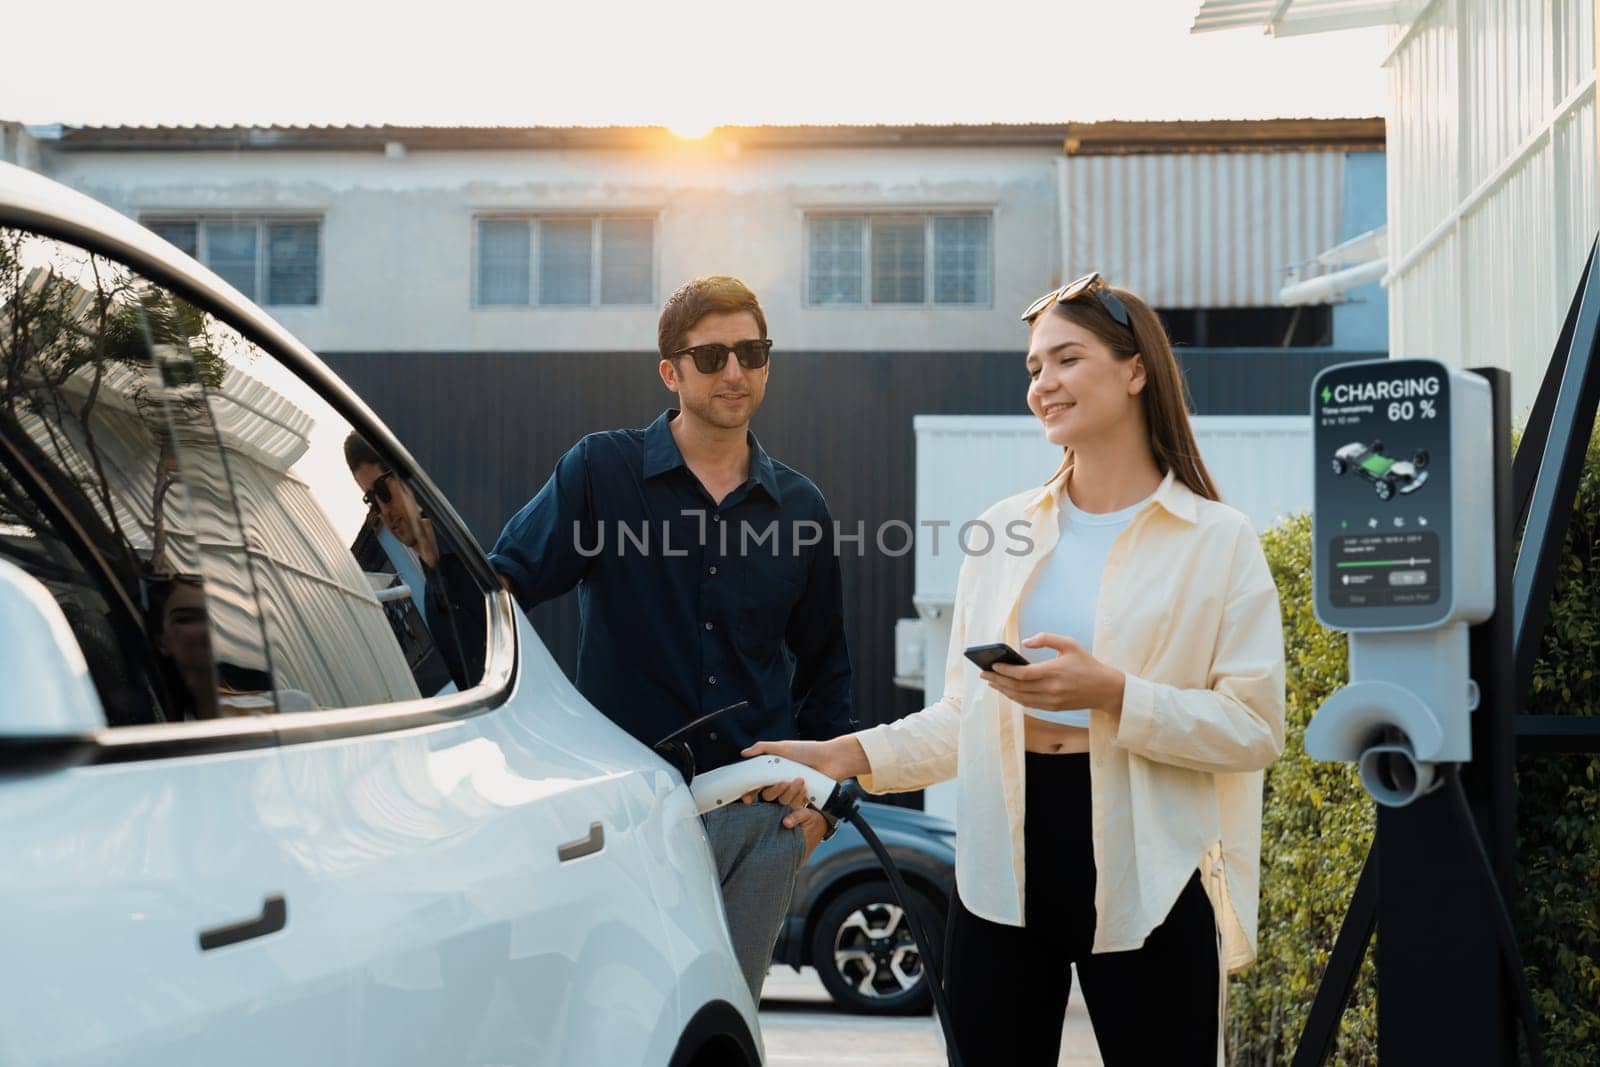 Eco-friendly conscious family couple recharging EV vehicle from home charging station. EV electric car technology utilized as alternative transportation for future sustainability. Expedient